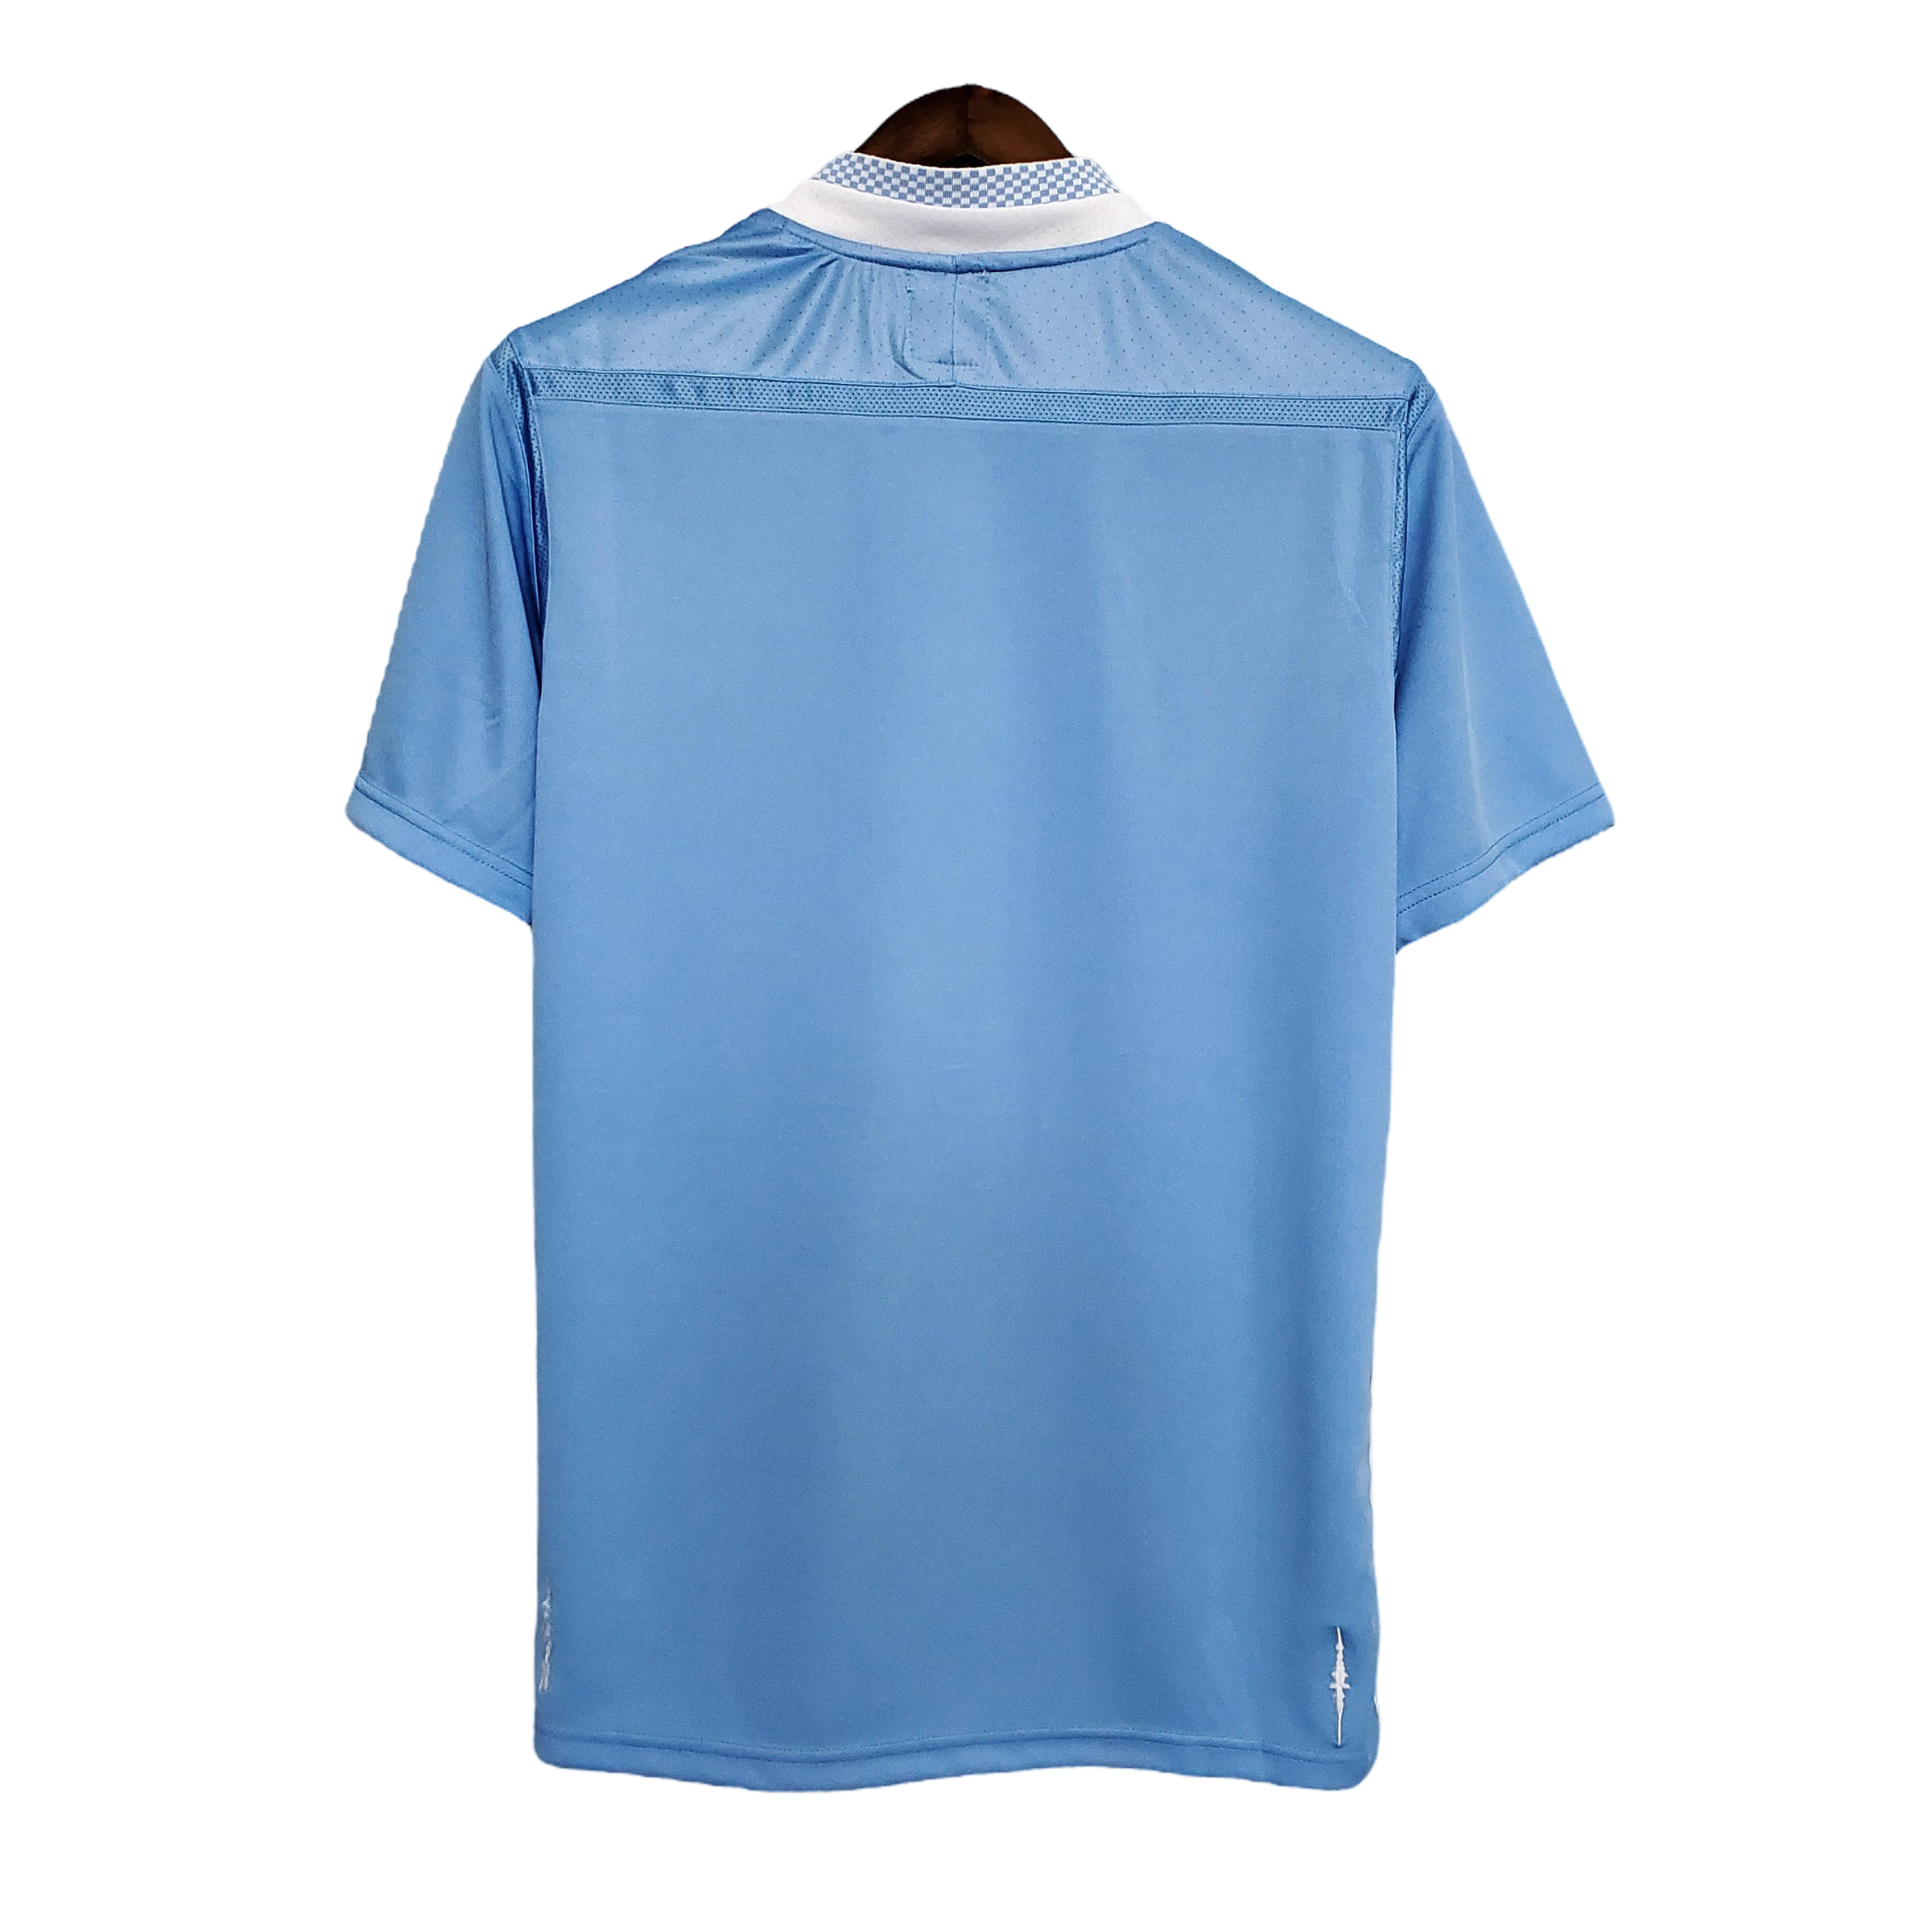 2011/12 Manchester City F.C. Home Jersey